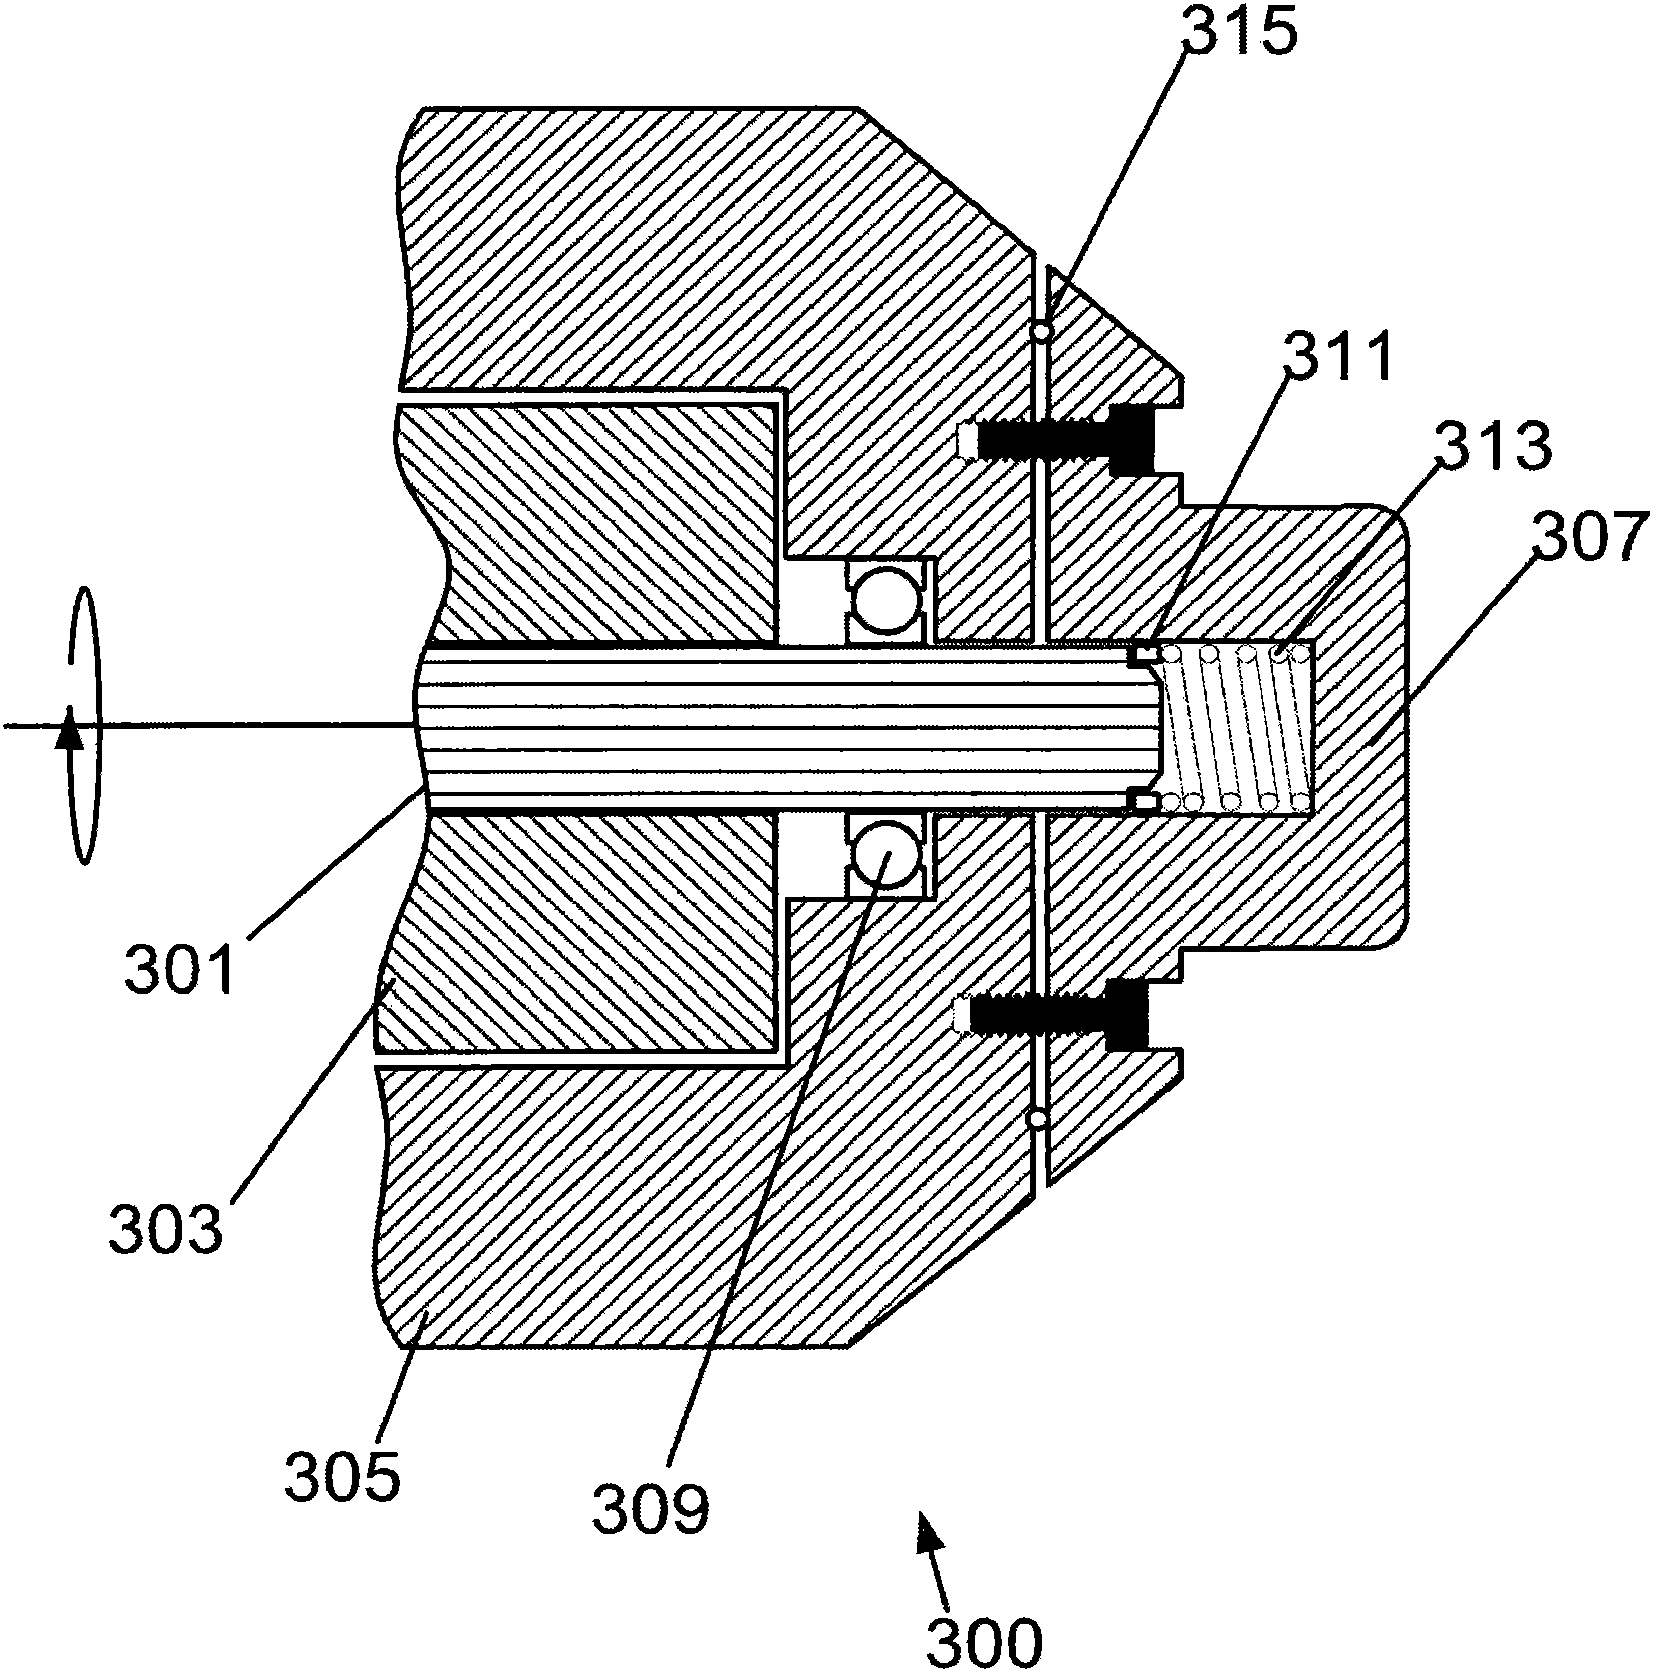 Electrical bearing ground device